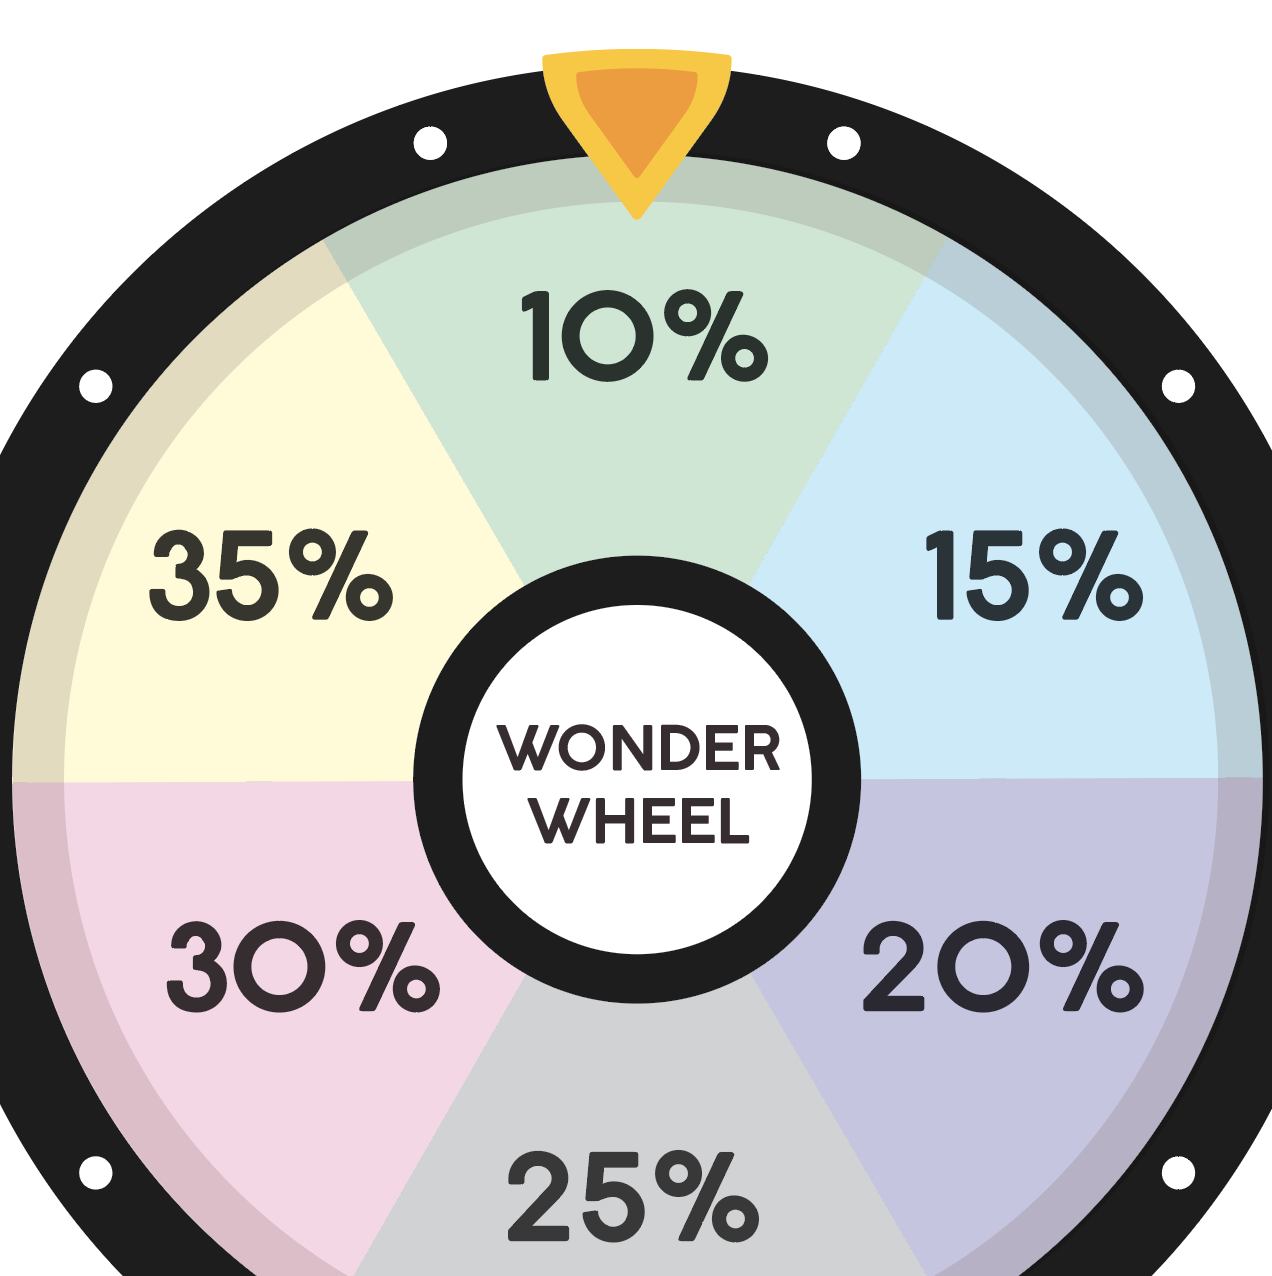 spin the wonder wheel for your discount!